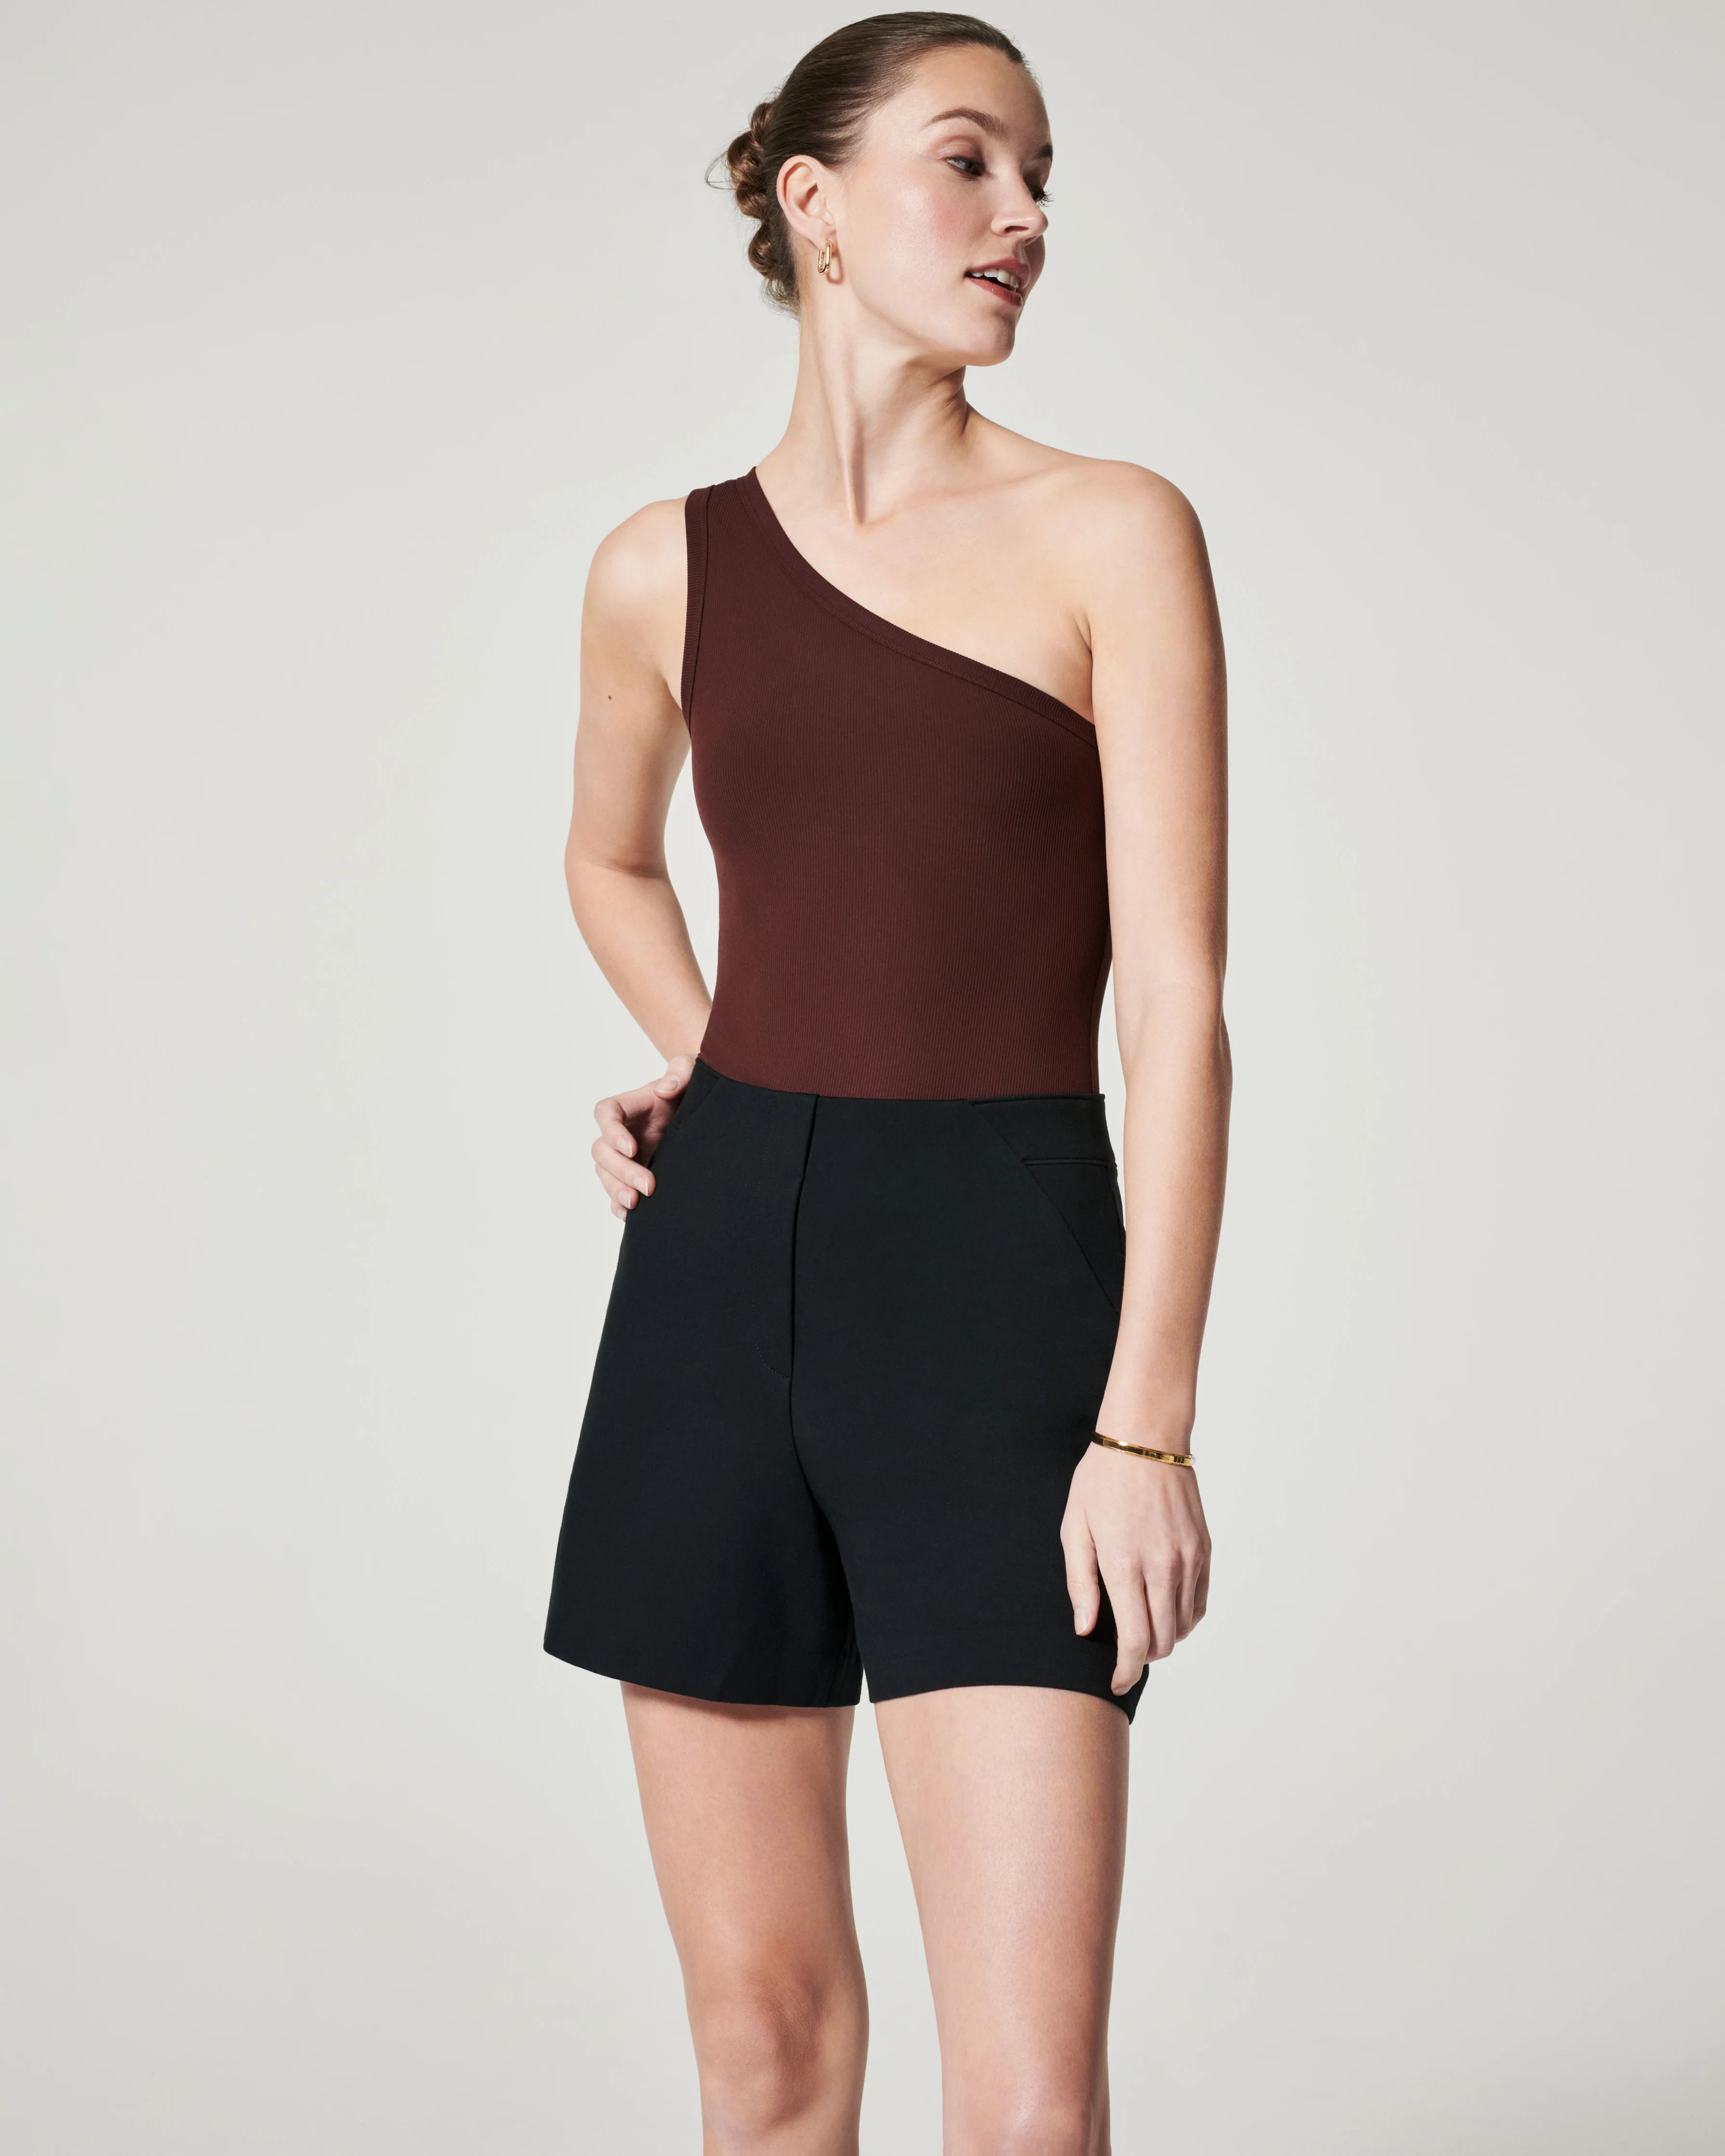 Suit Yourself Ribbed One Shoulder Bodysuit | Spanx